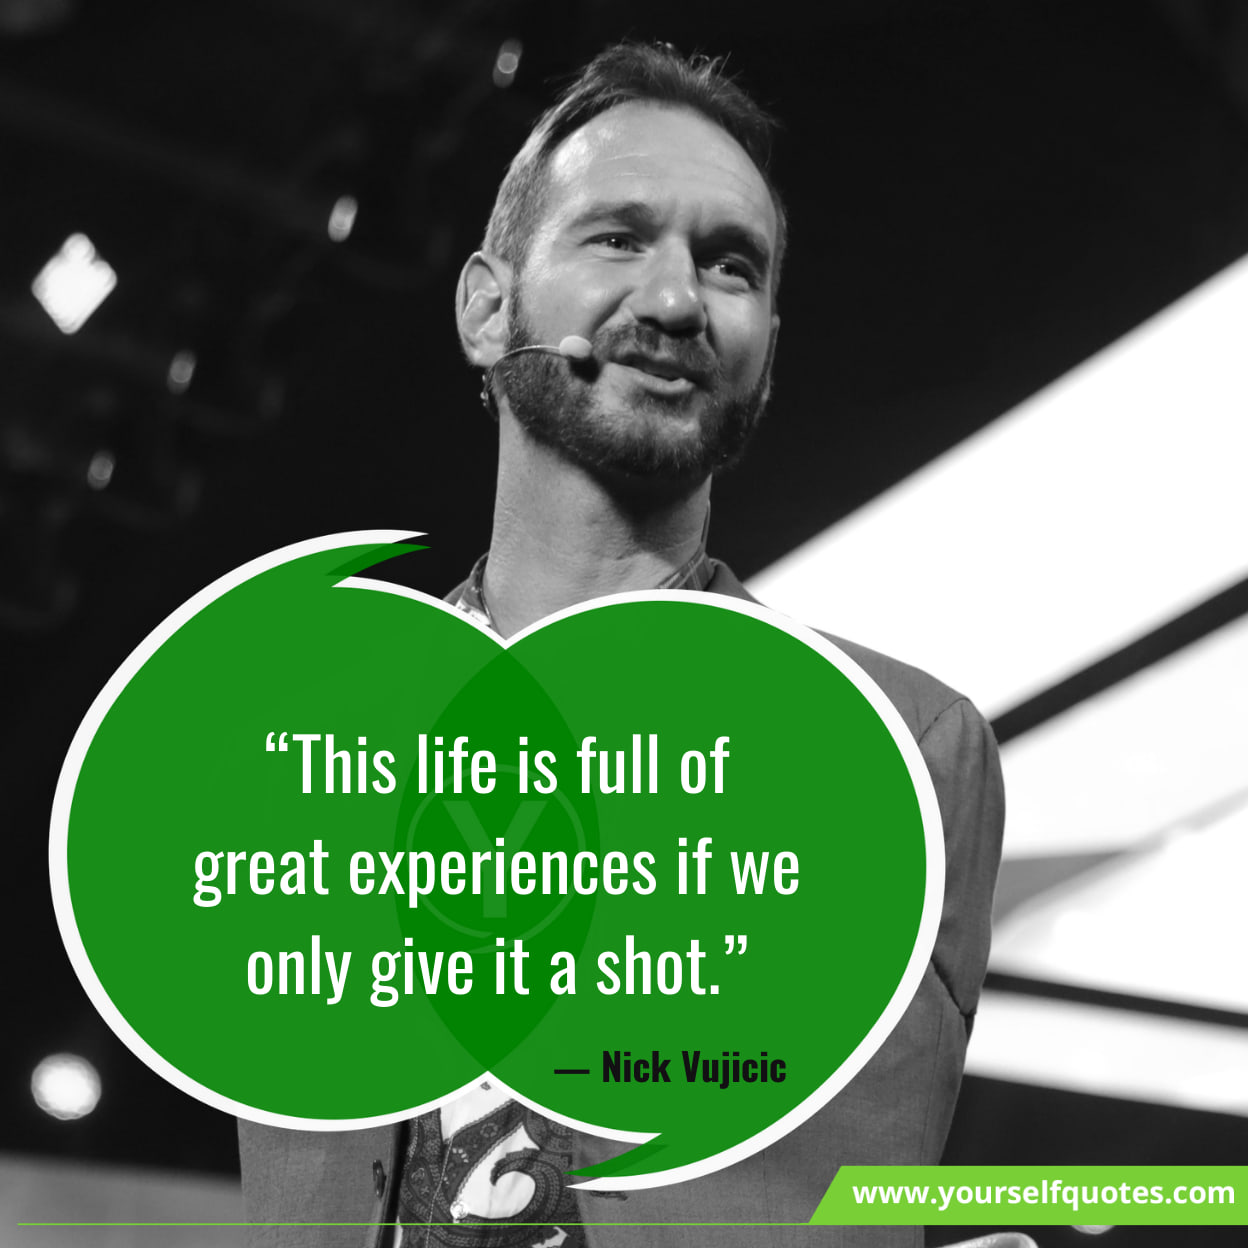 Nick Vujicic Quotes About Life